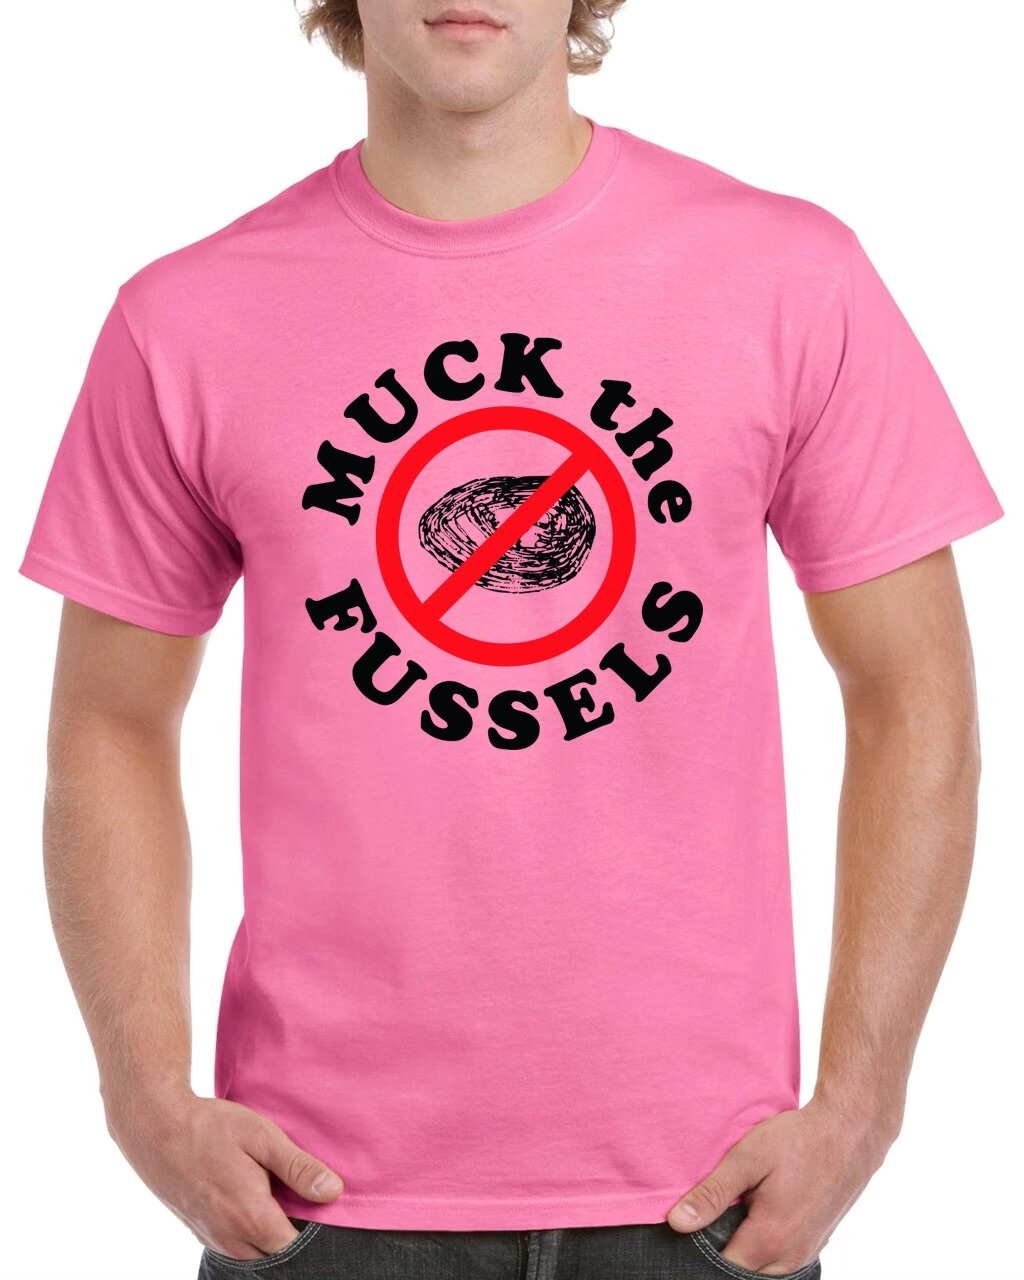 Muck The Fussels Artwork